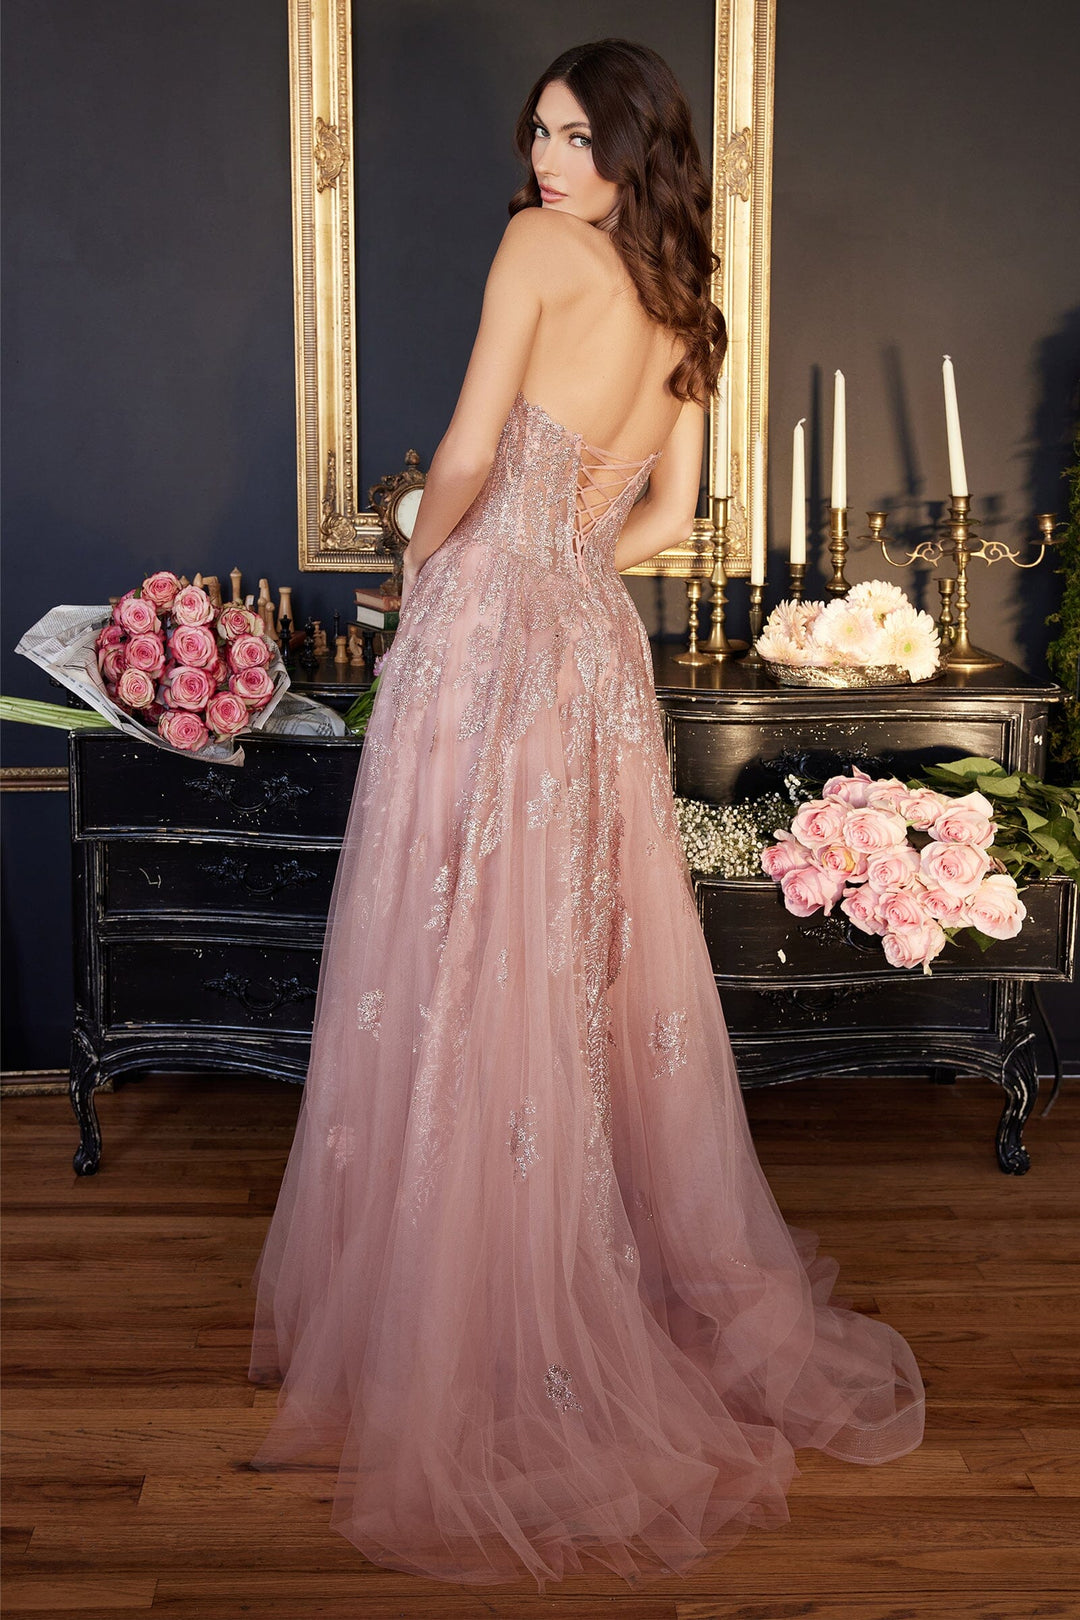 Glitter Applique Strapless Tulle Gown by Ladivine J852